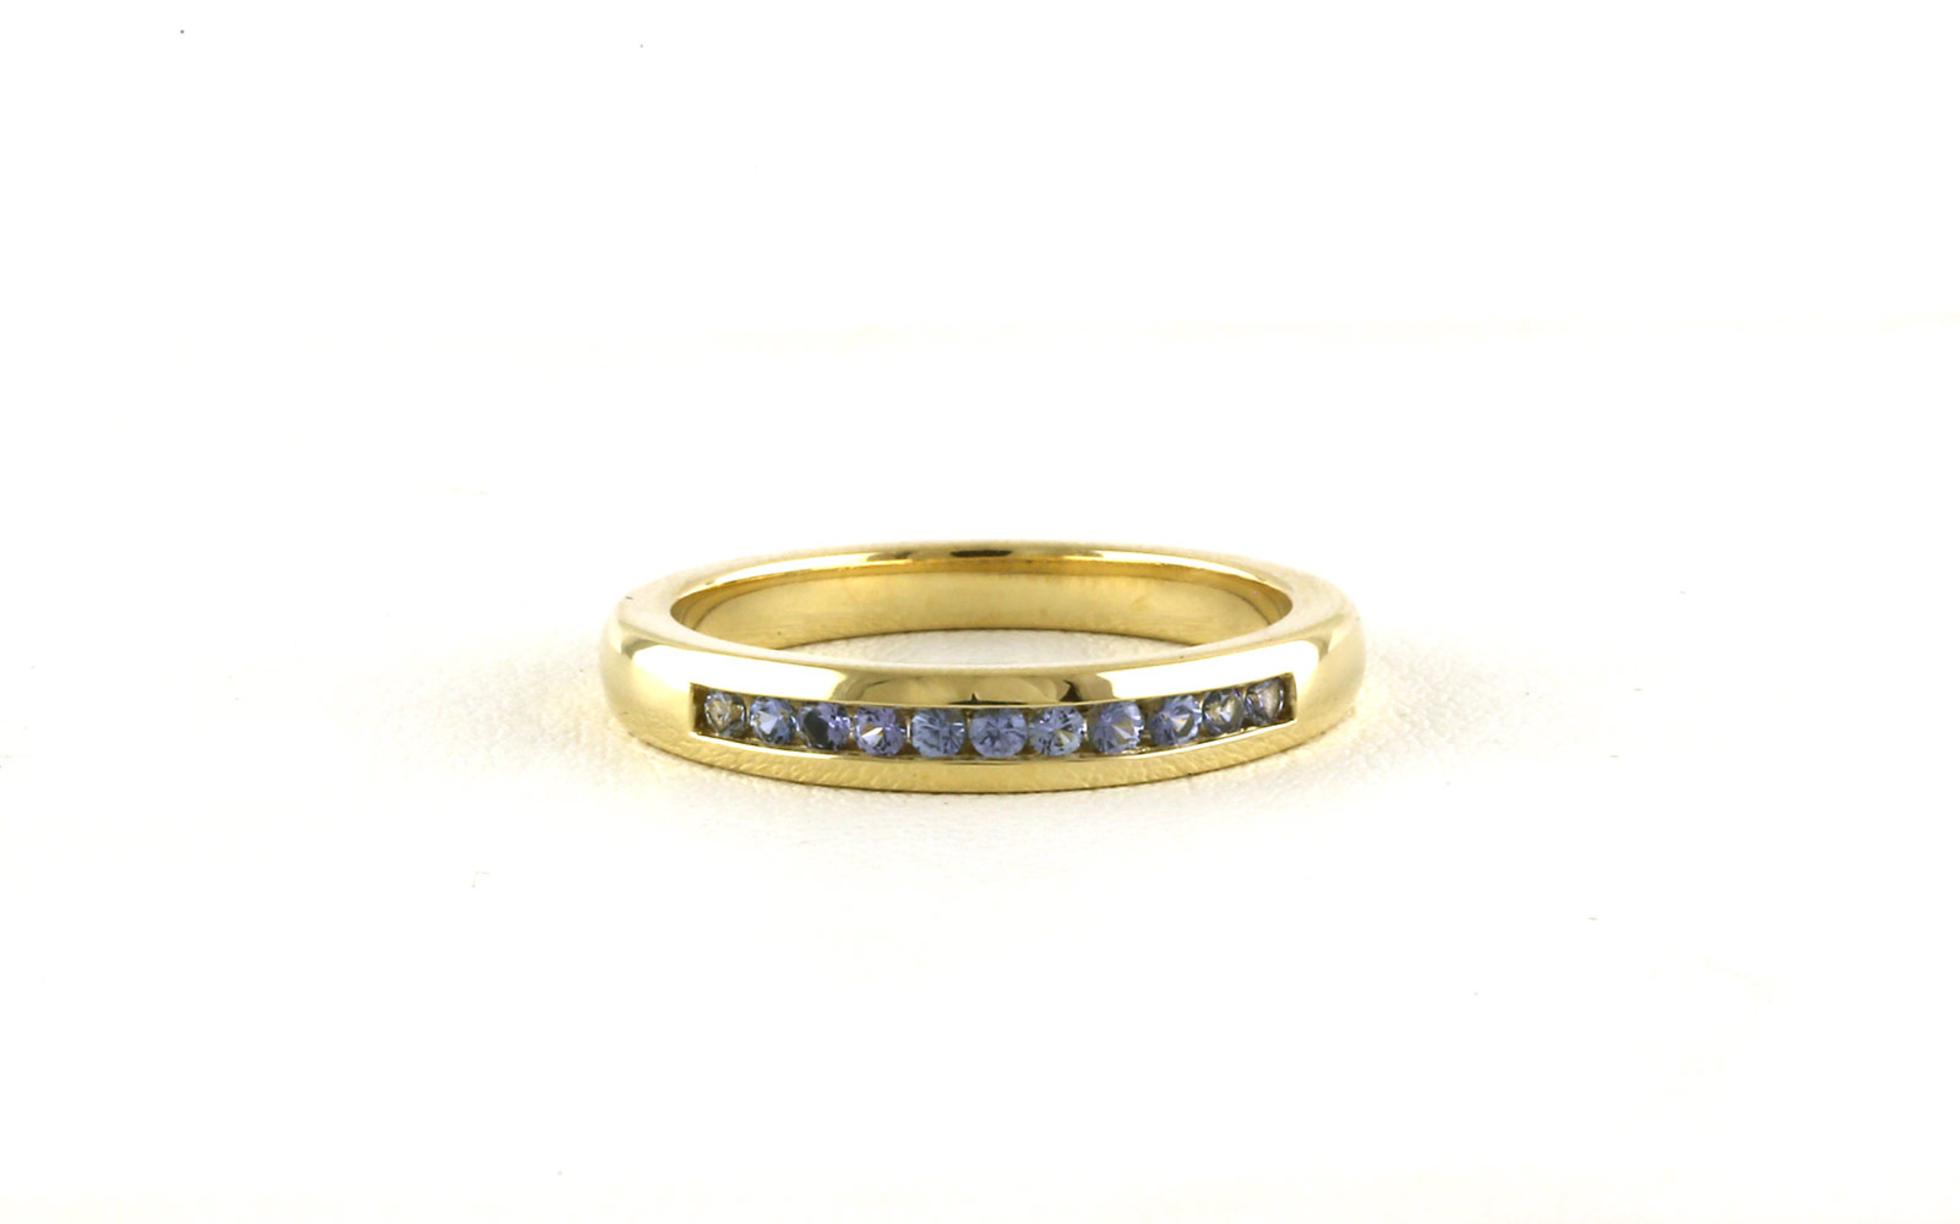 11-Stone Channel-set Montana Yogo Sapphire Band in Yellow Gold (0.19cts TWT)